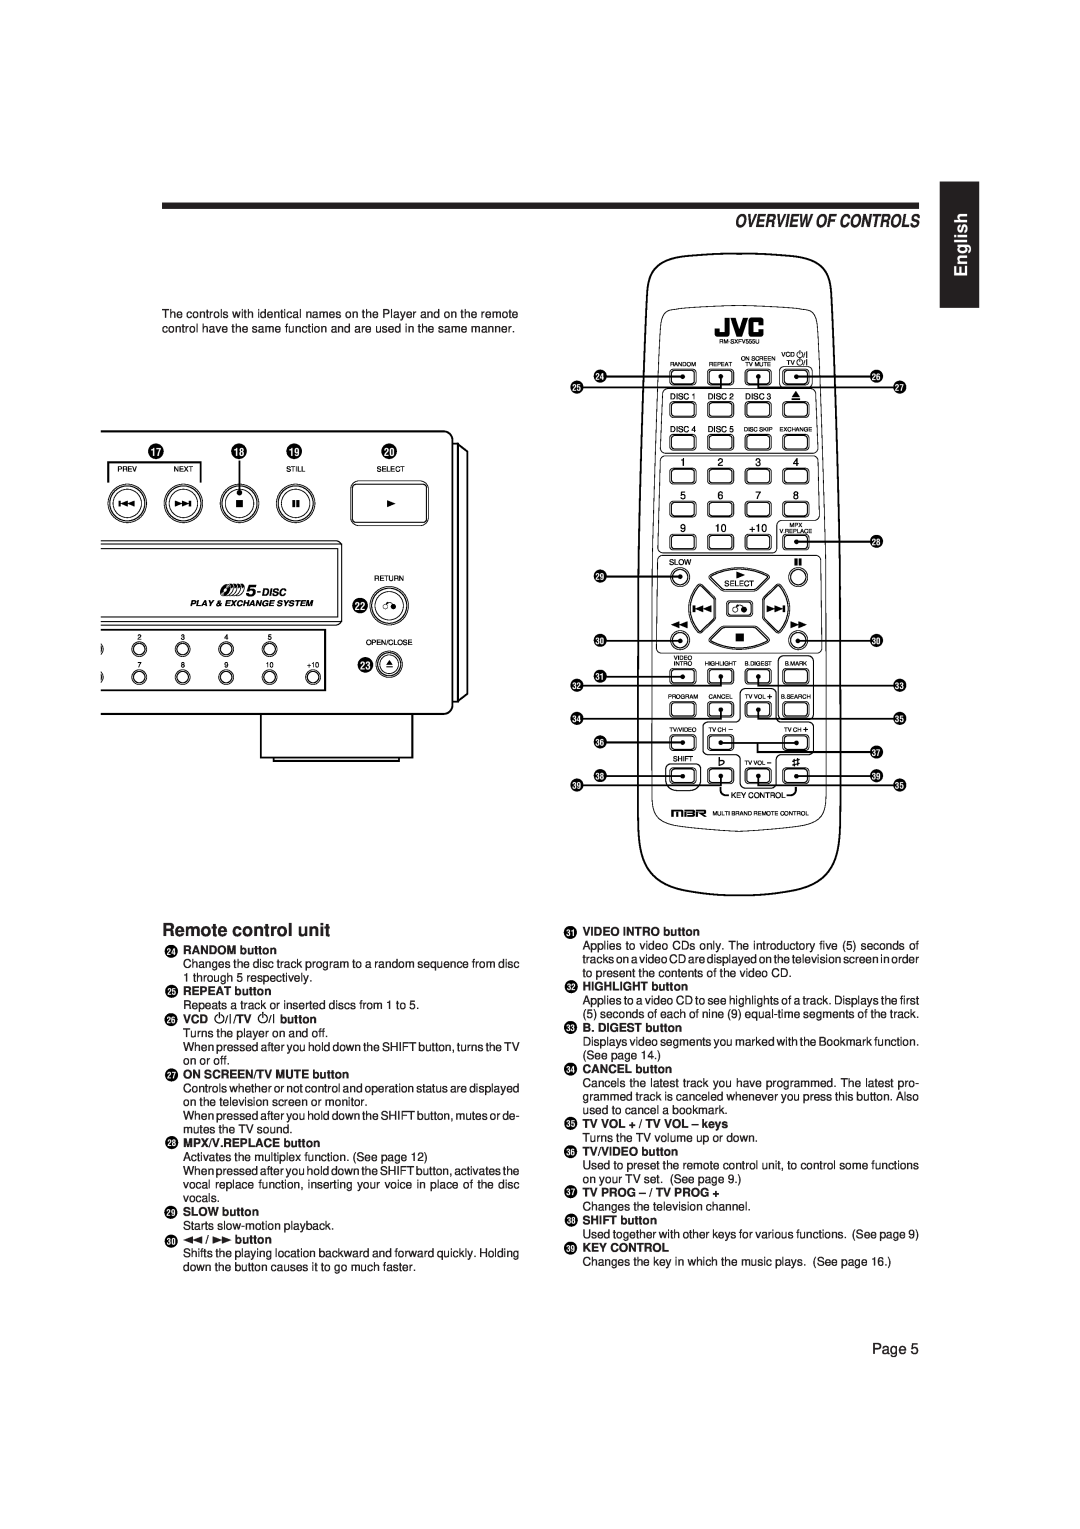 JVC XL-FV323TN manual Overview Of Controls, Remote control unit, English, Page 